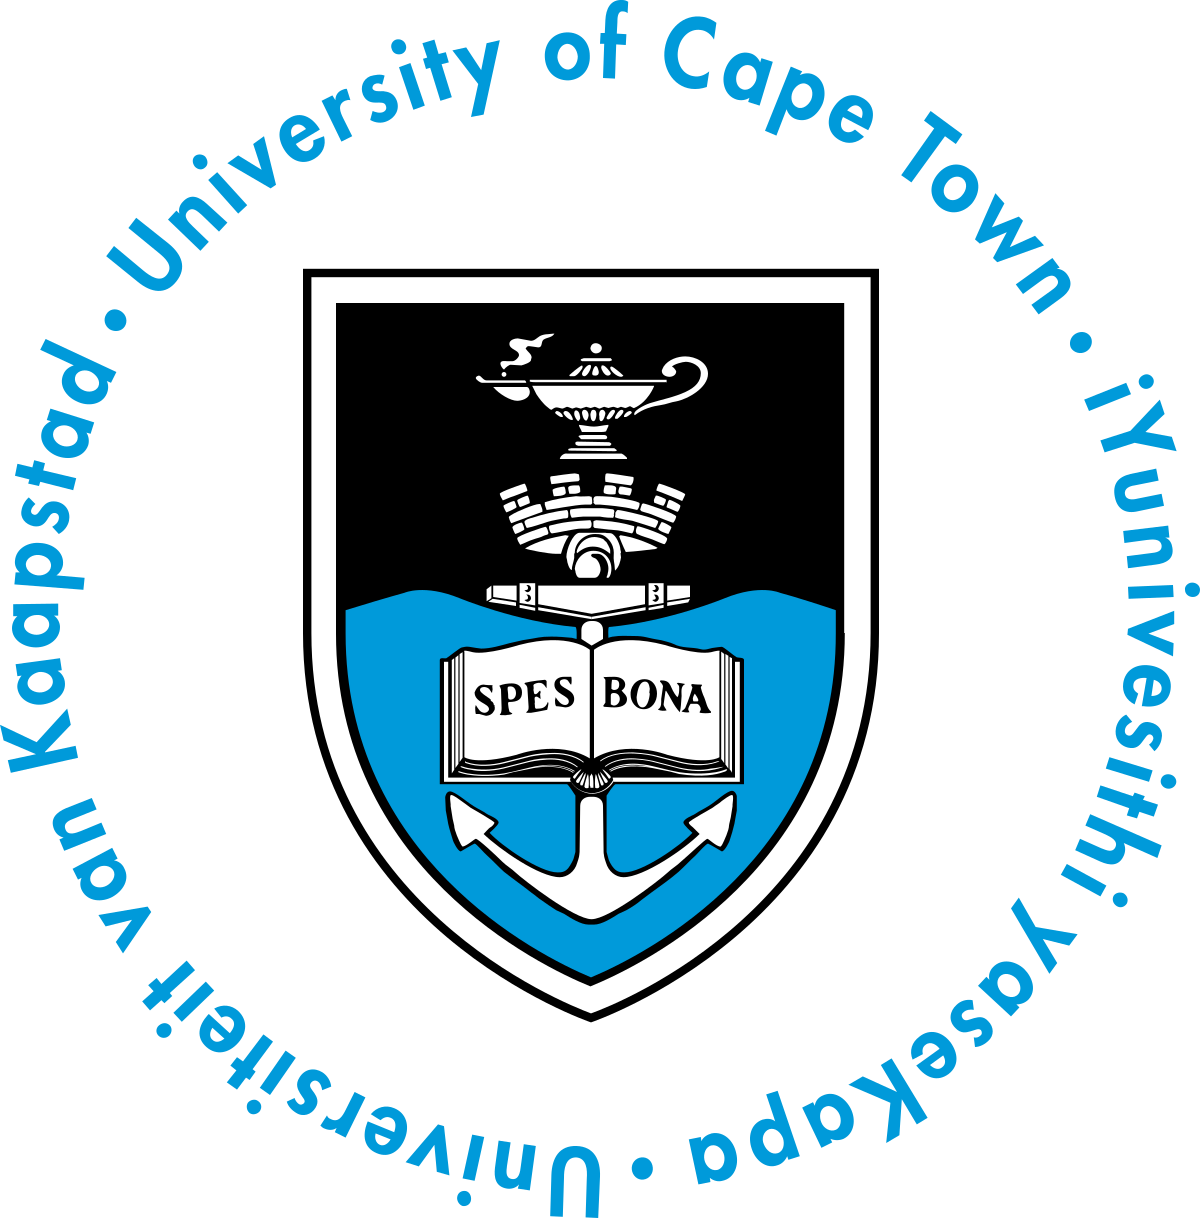 University-of-Cape-Town.png